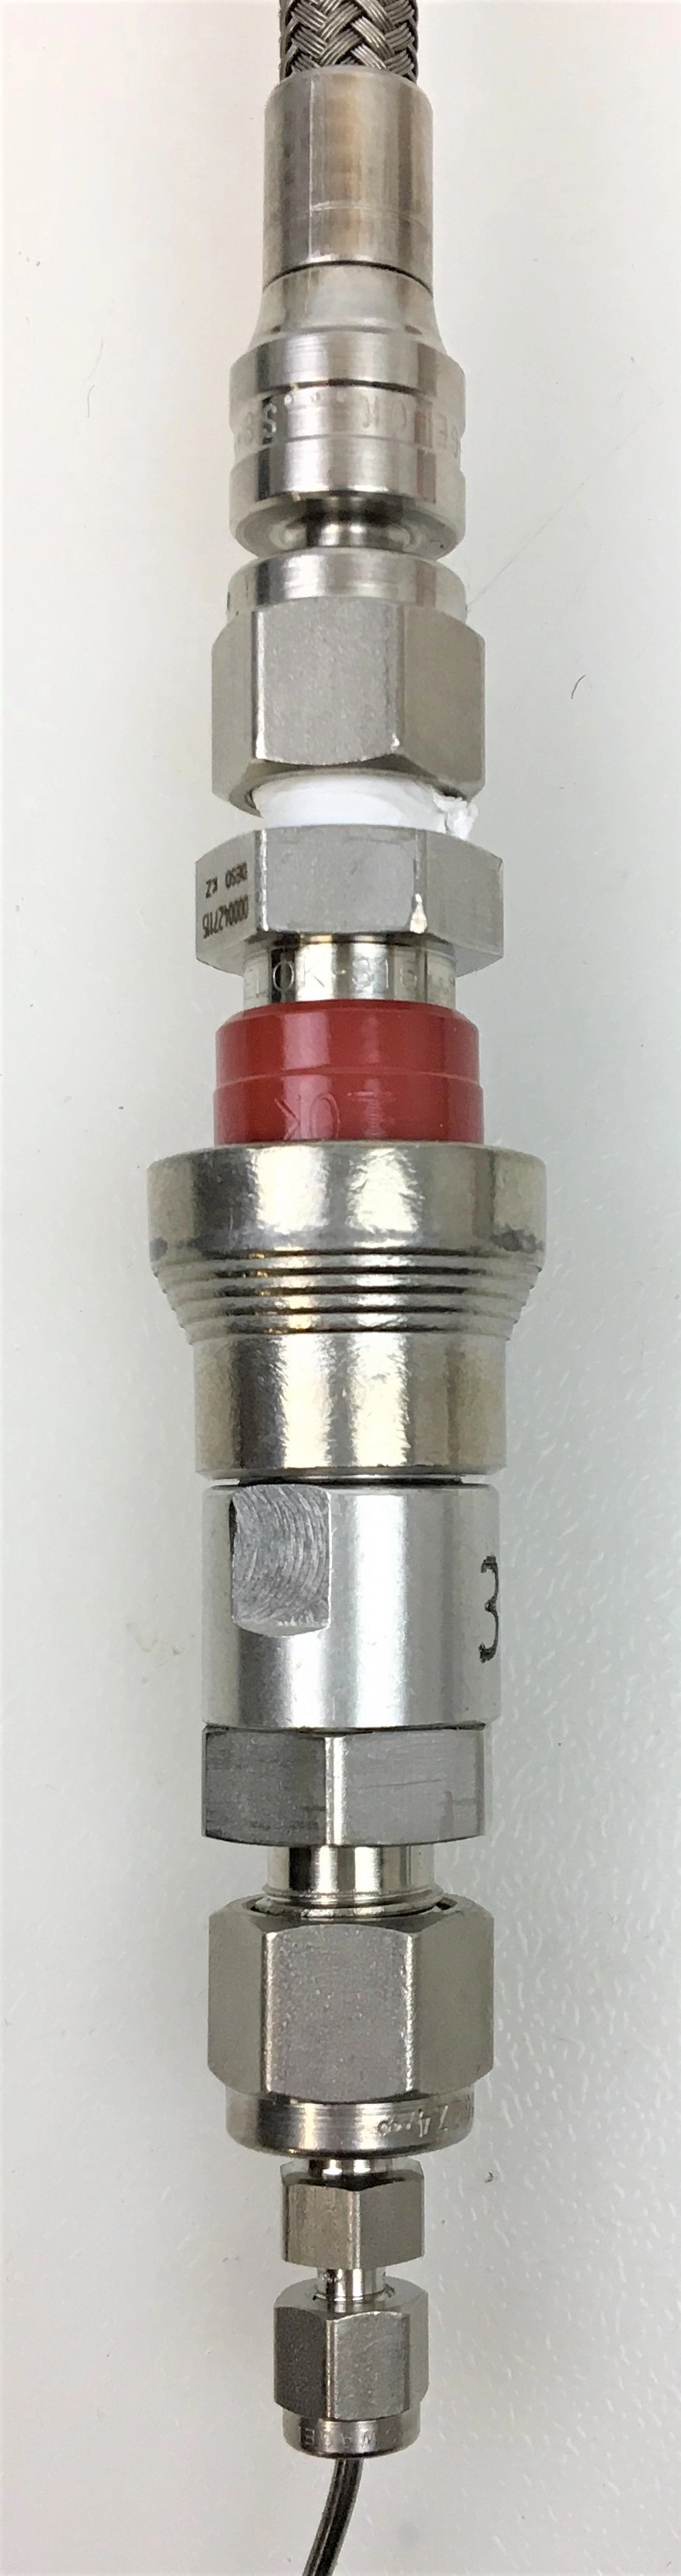 Swagelok Quick-Connect Body with Stainless Steel 1/8" Tubing